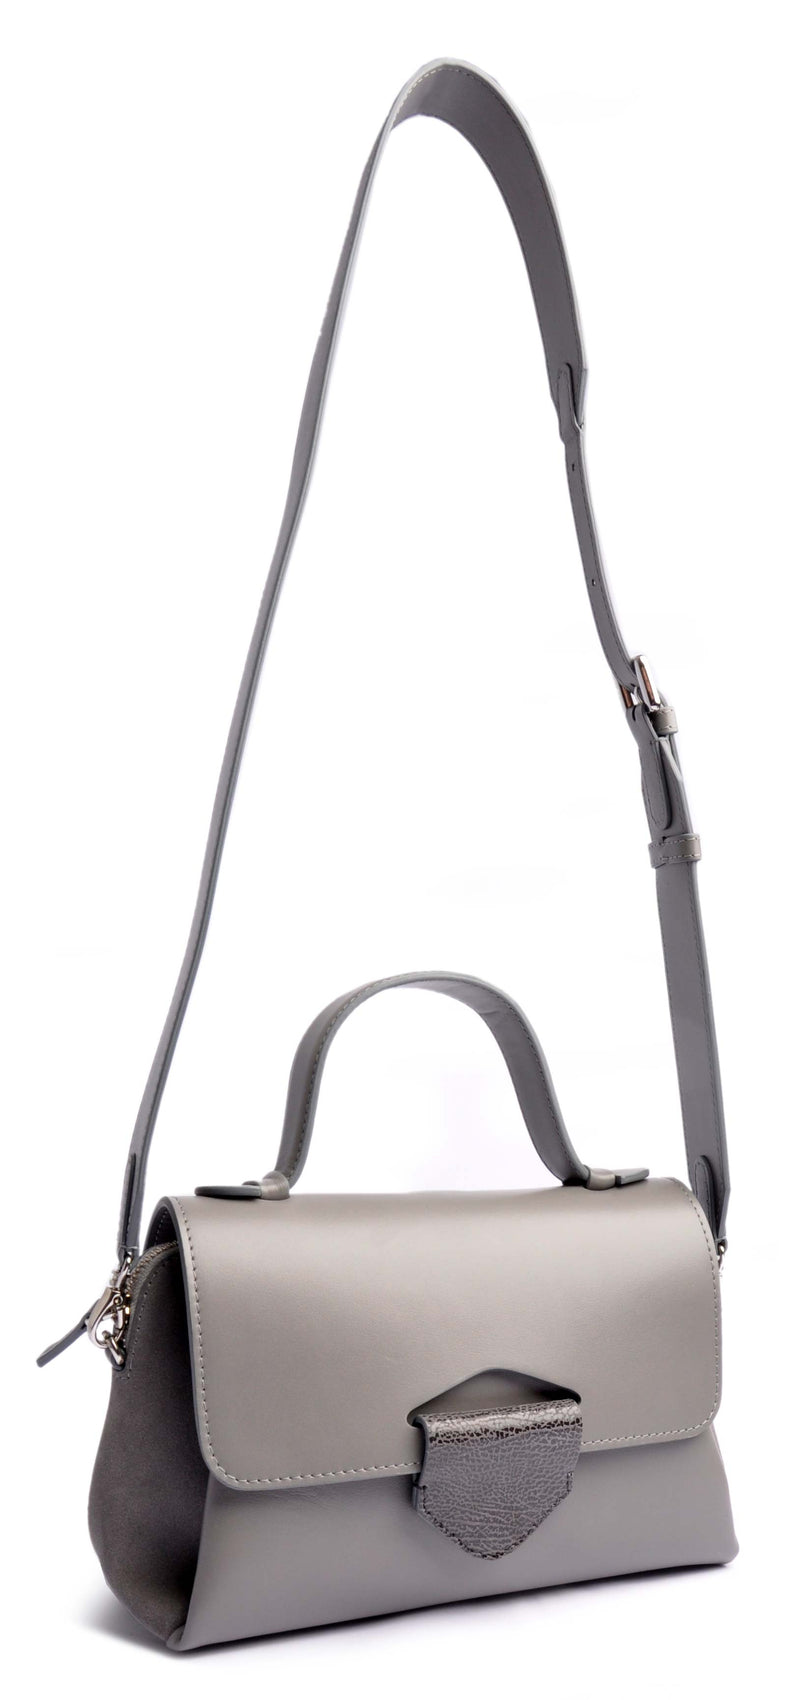 ARROW TOTE Small satin-finished calfskin in grey . With one adjustable Statement and narrow strap . OSTWALD Leather Manufactory.